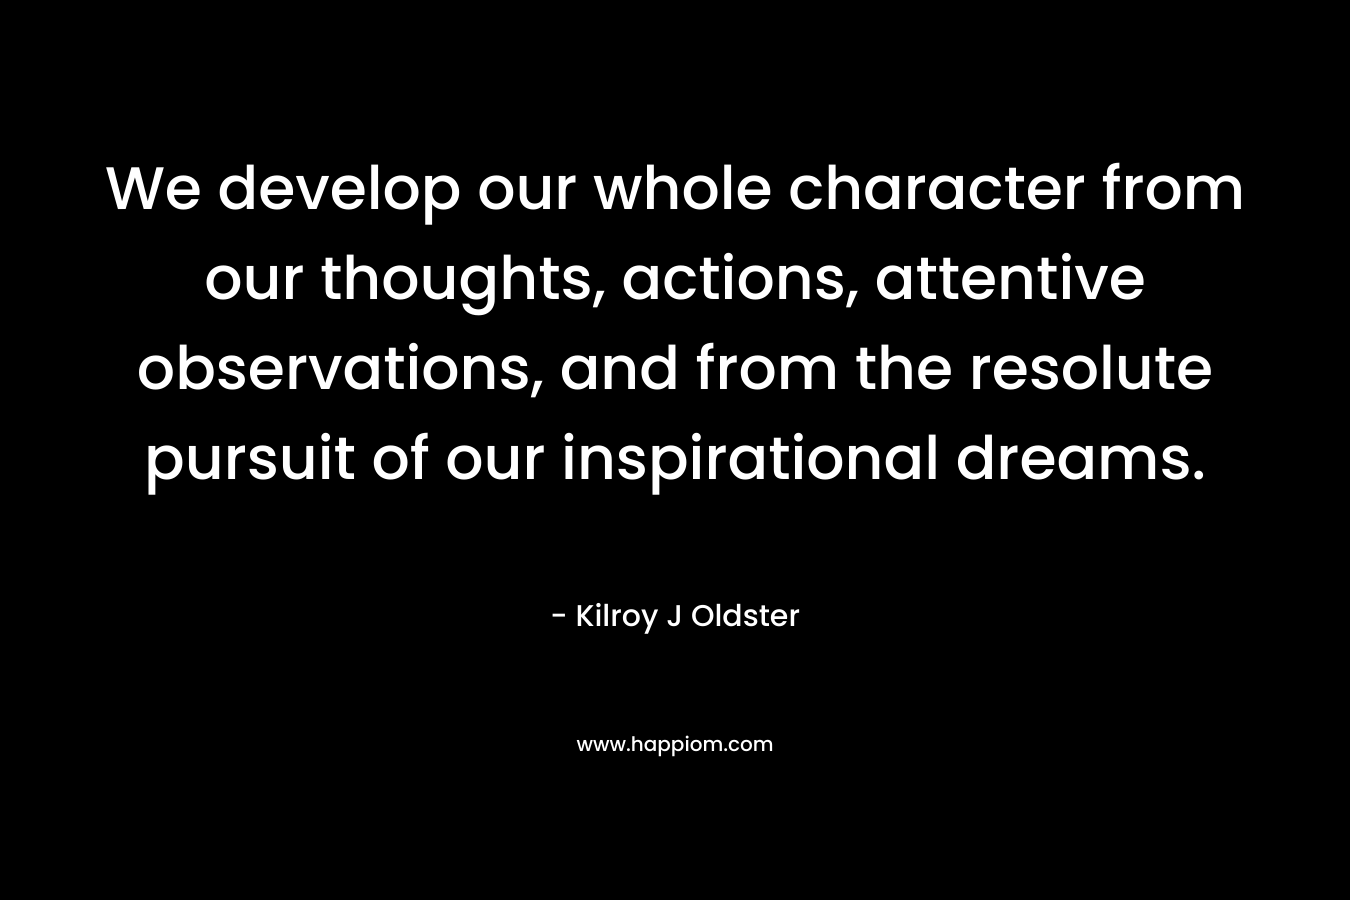 We develop our whole character from our thoughts, actions, attentive observations, and from the resolute pursuit of our inspirational dreams.